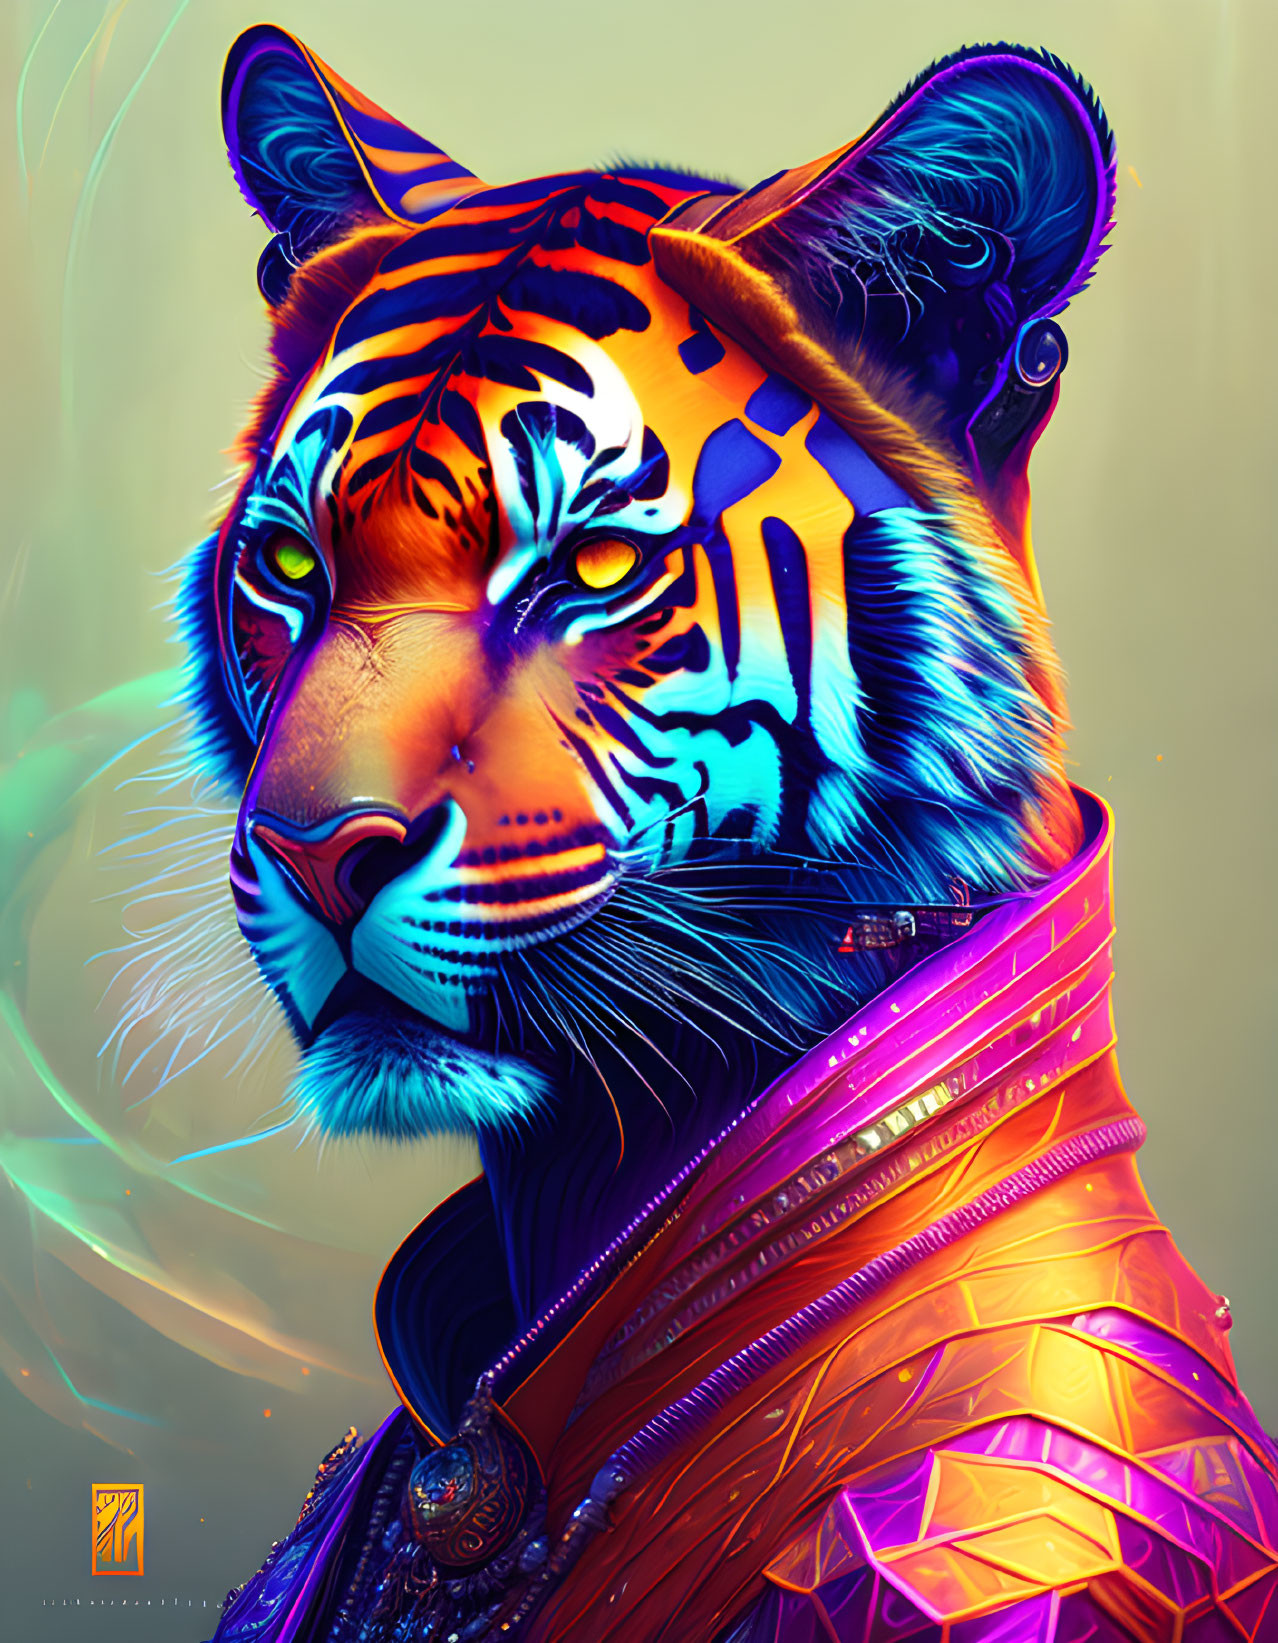 Colorful Tiger Artwork with Neon Patterns on Warm Background